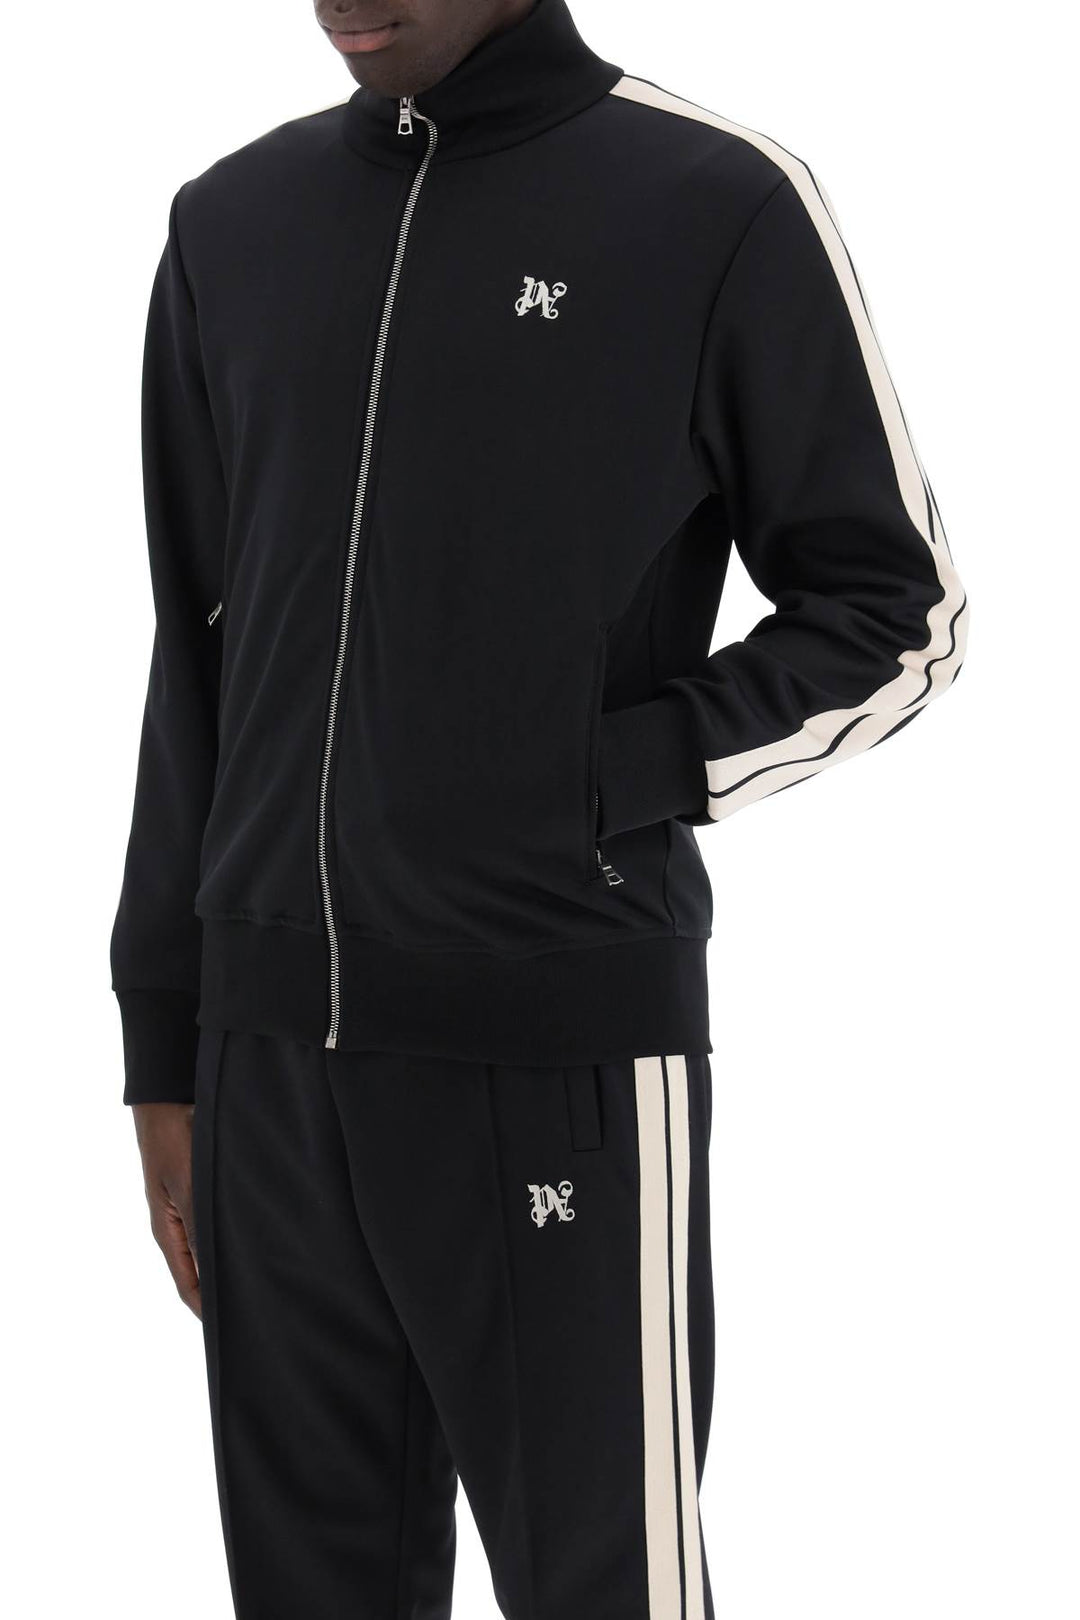 Palm Angels Track Sweatshirt With Contrasting Bands   Black